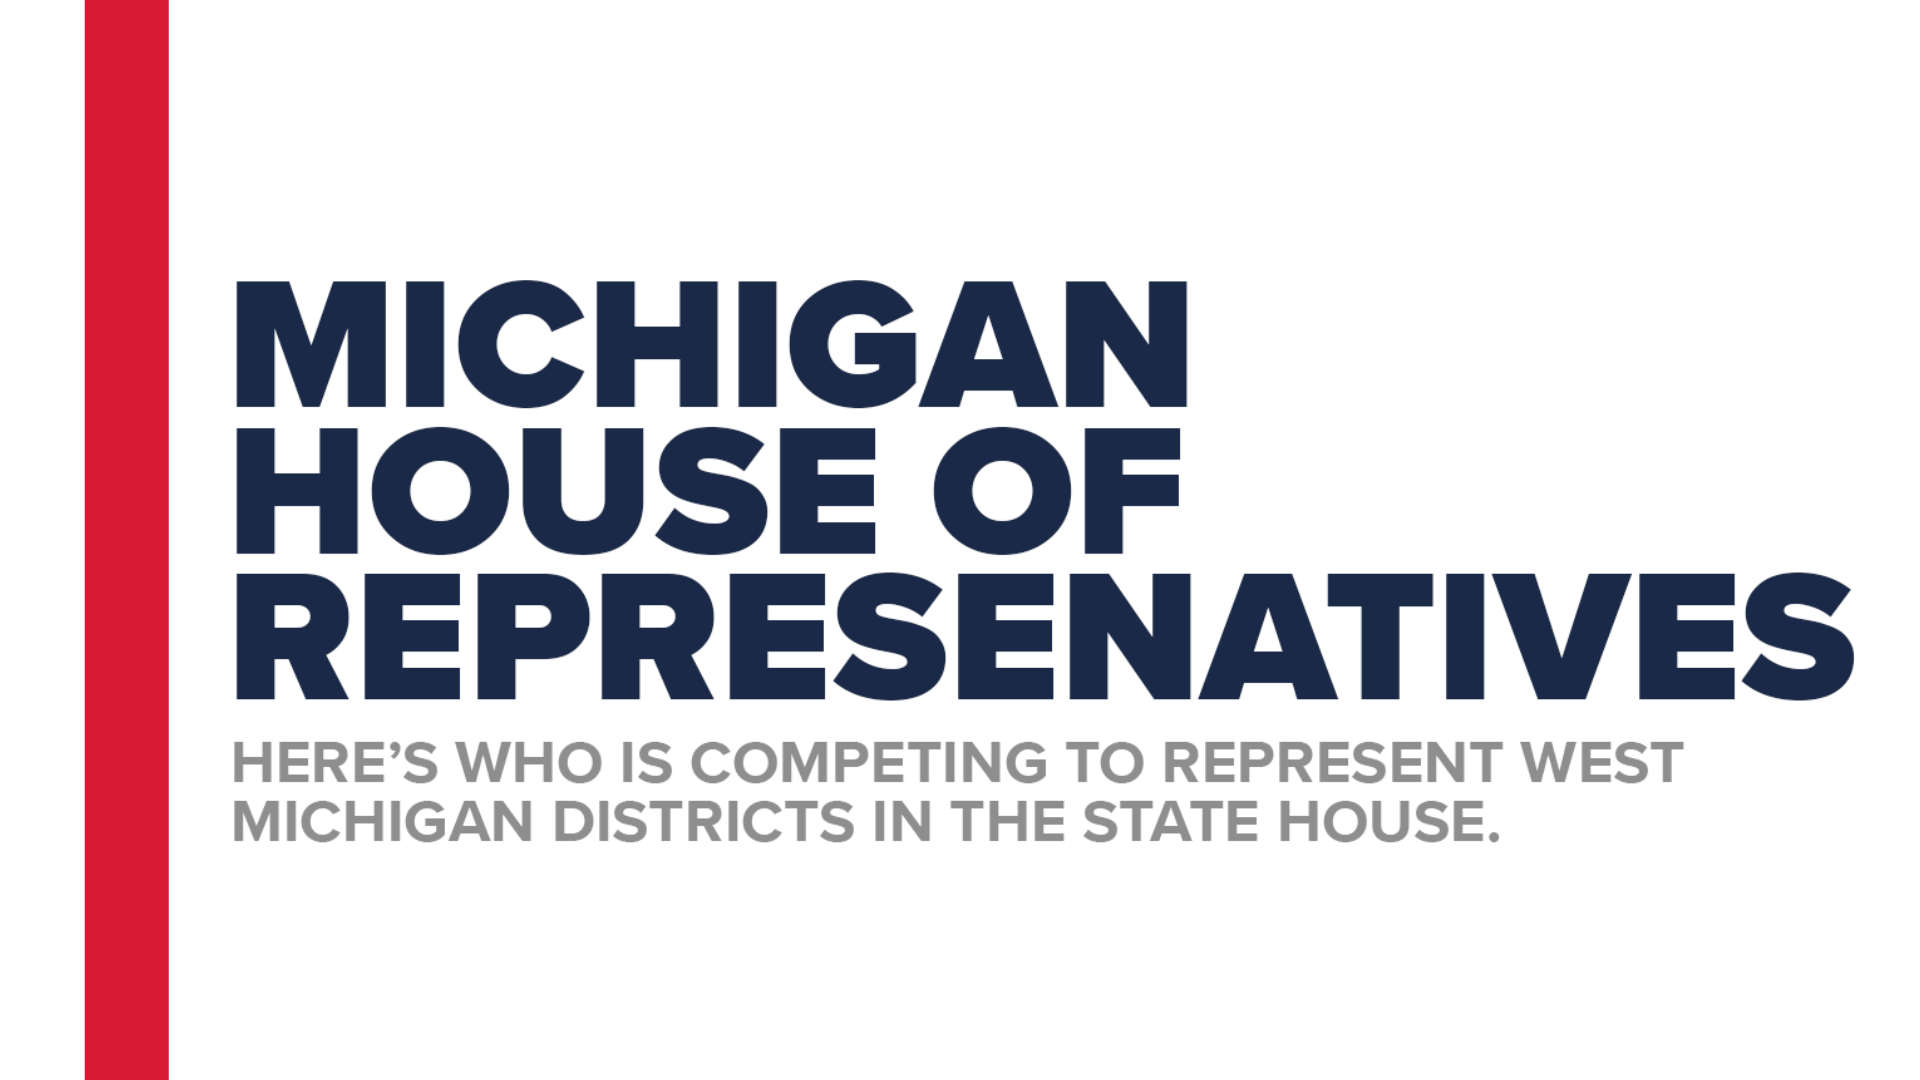 Who is running for the Michigan House of Representatives?